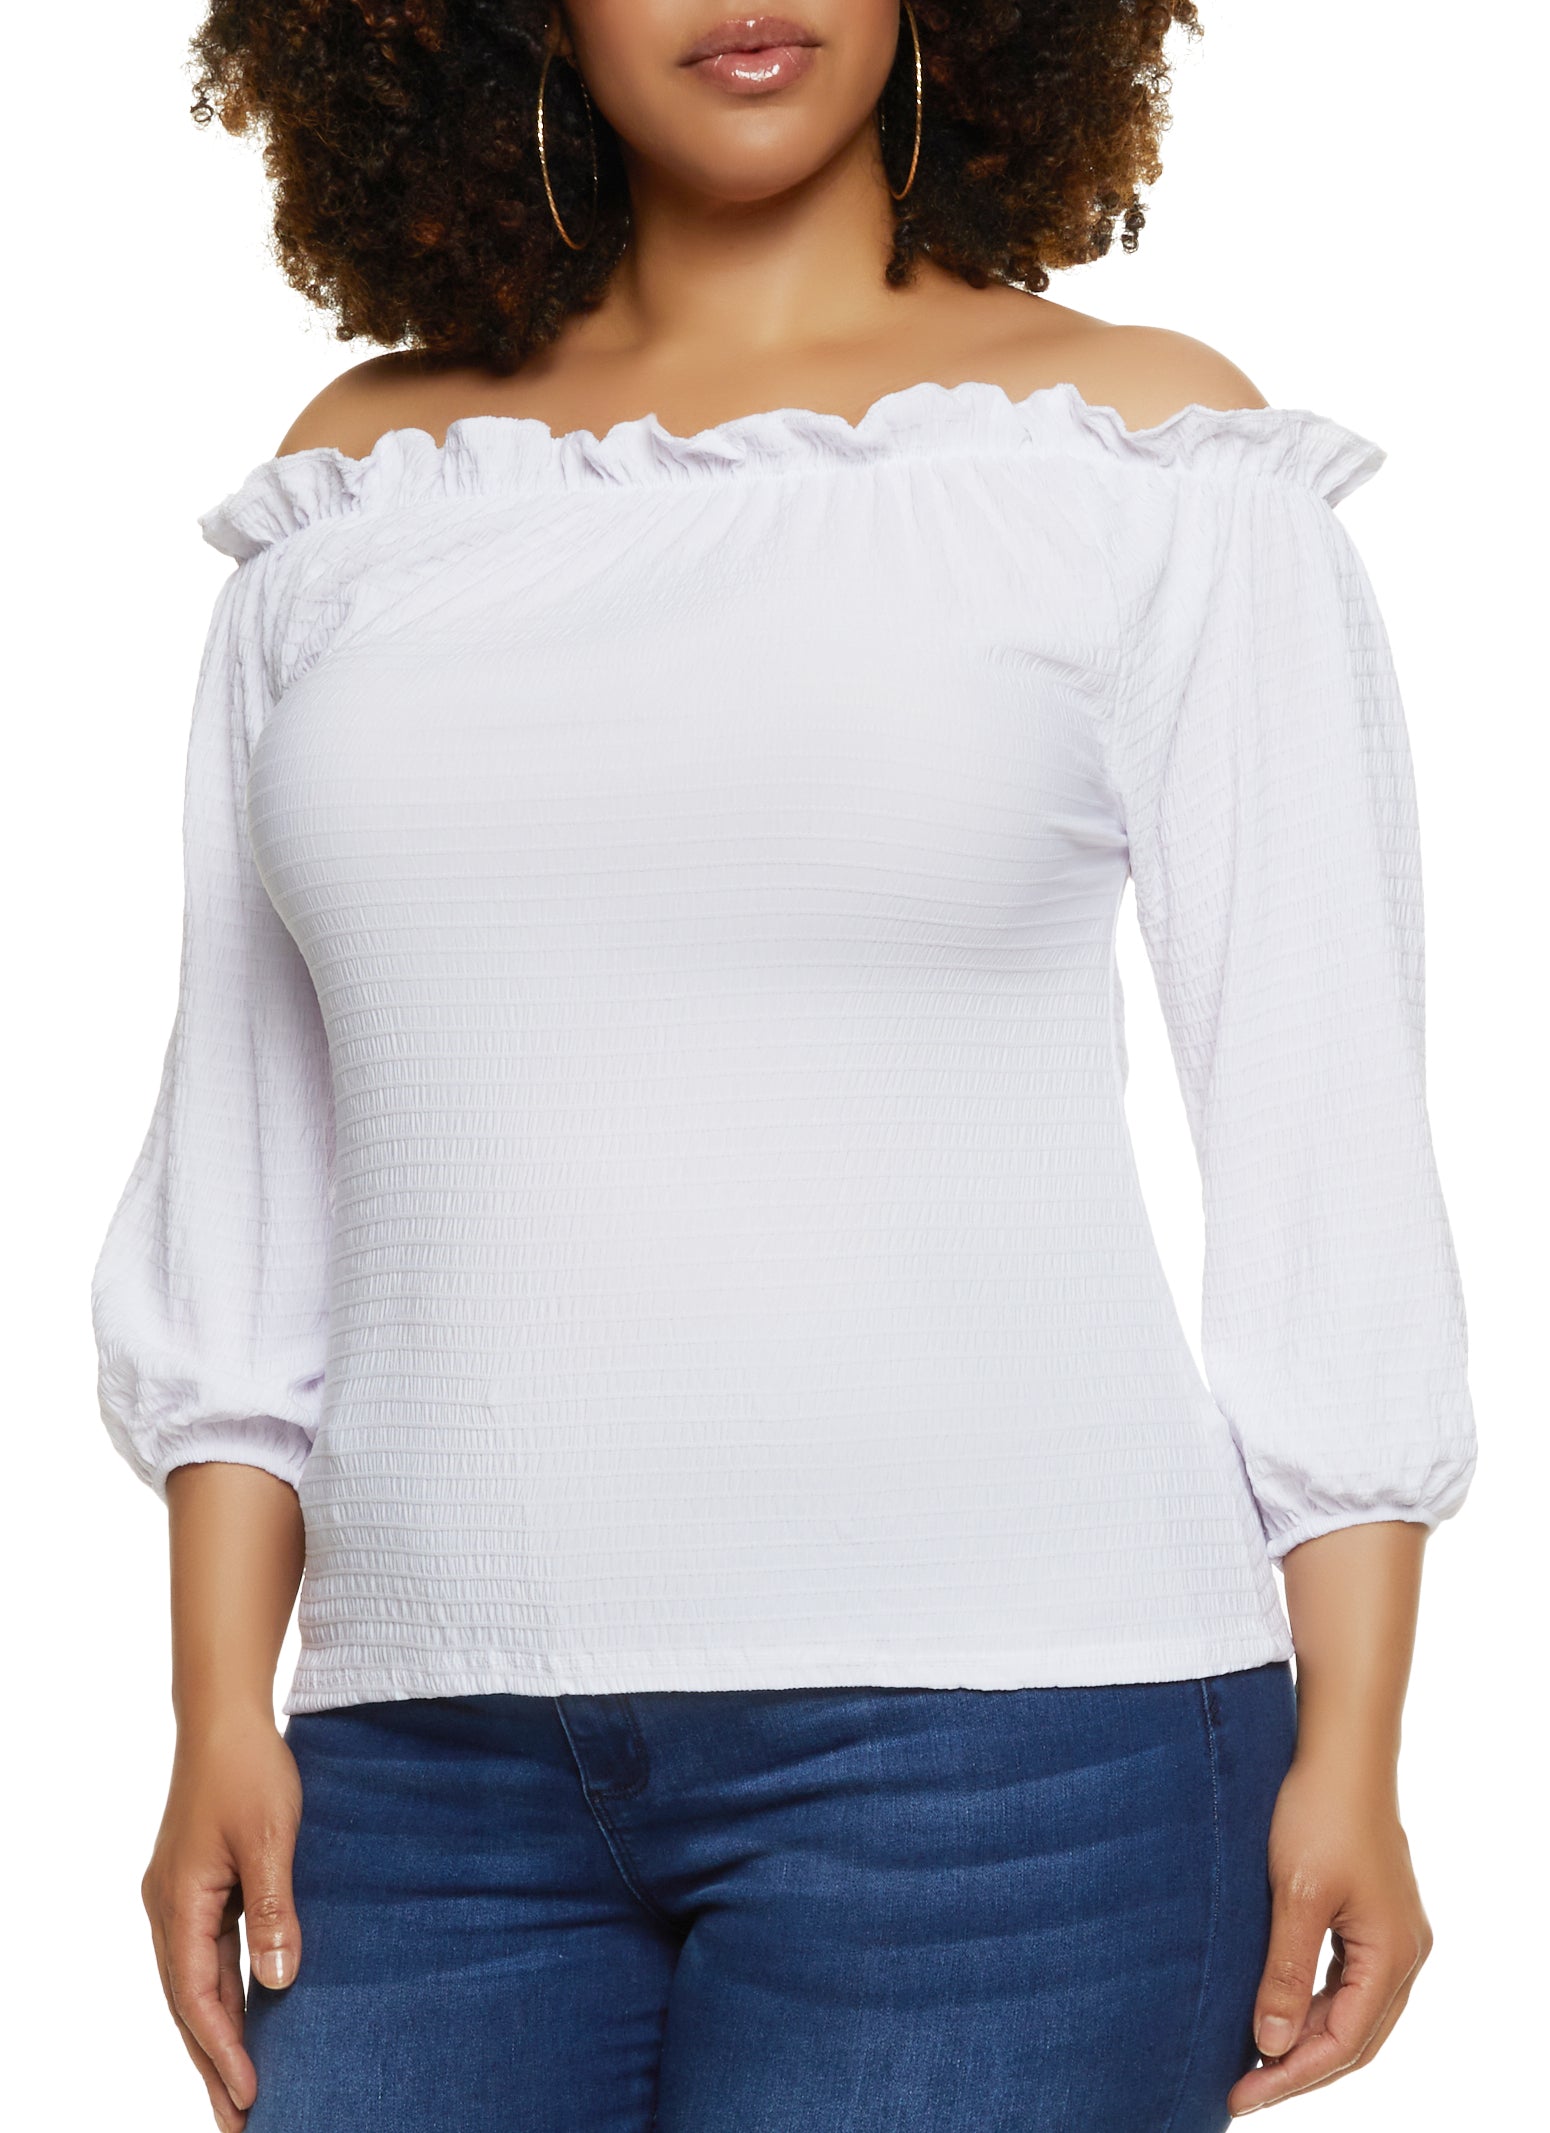 Plus Size Ruffled Trim Off the Shoulder Top